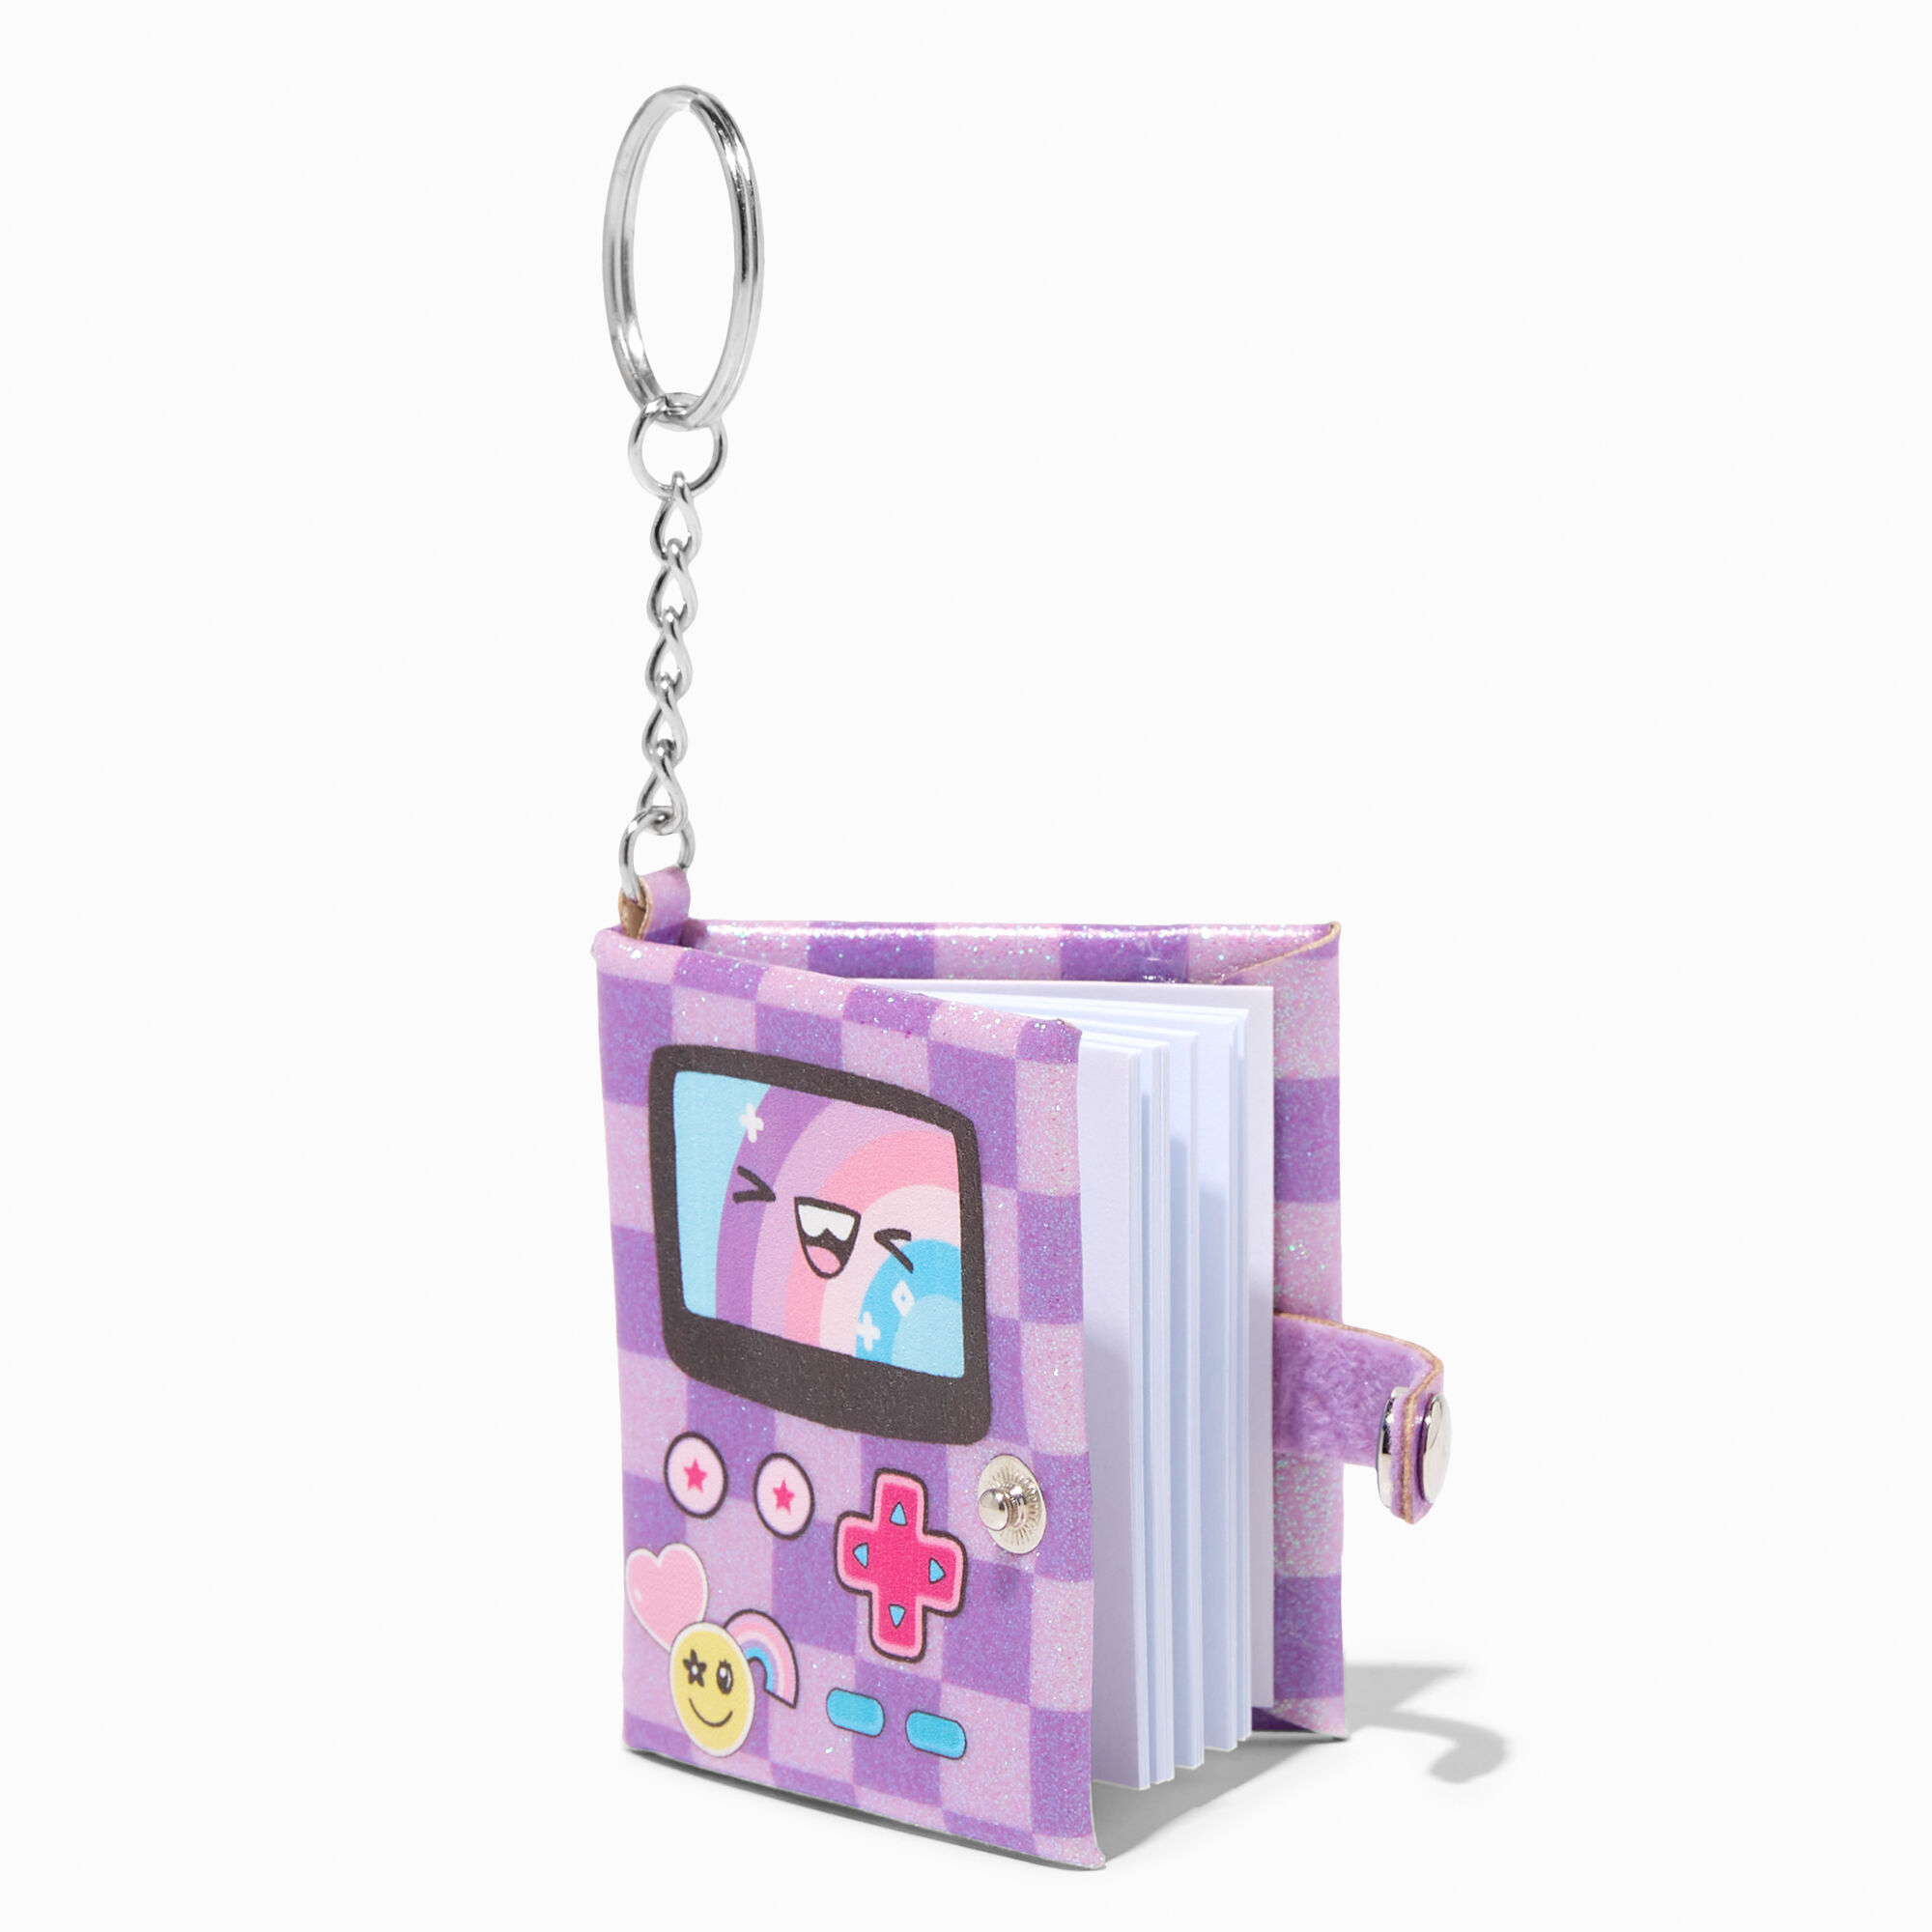 View Claires Gamer Girl Mini Diary Keychain information